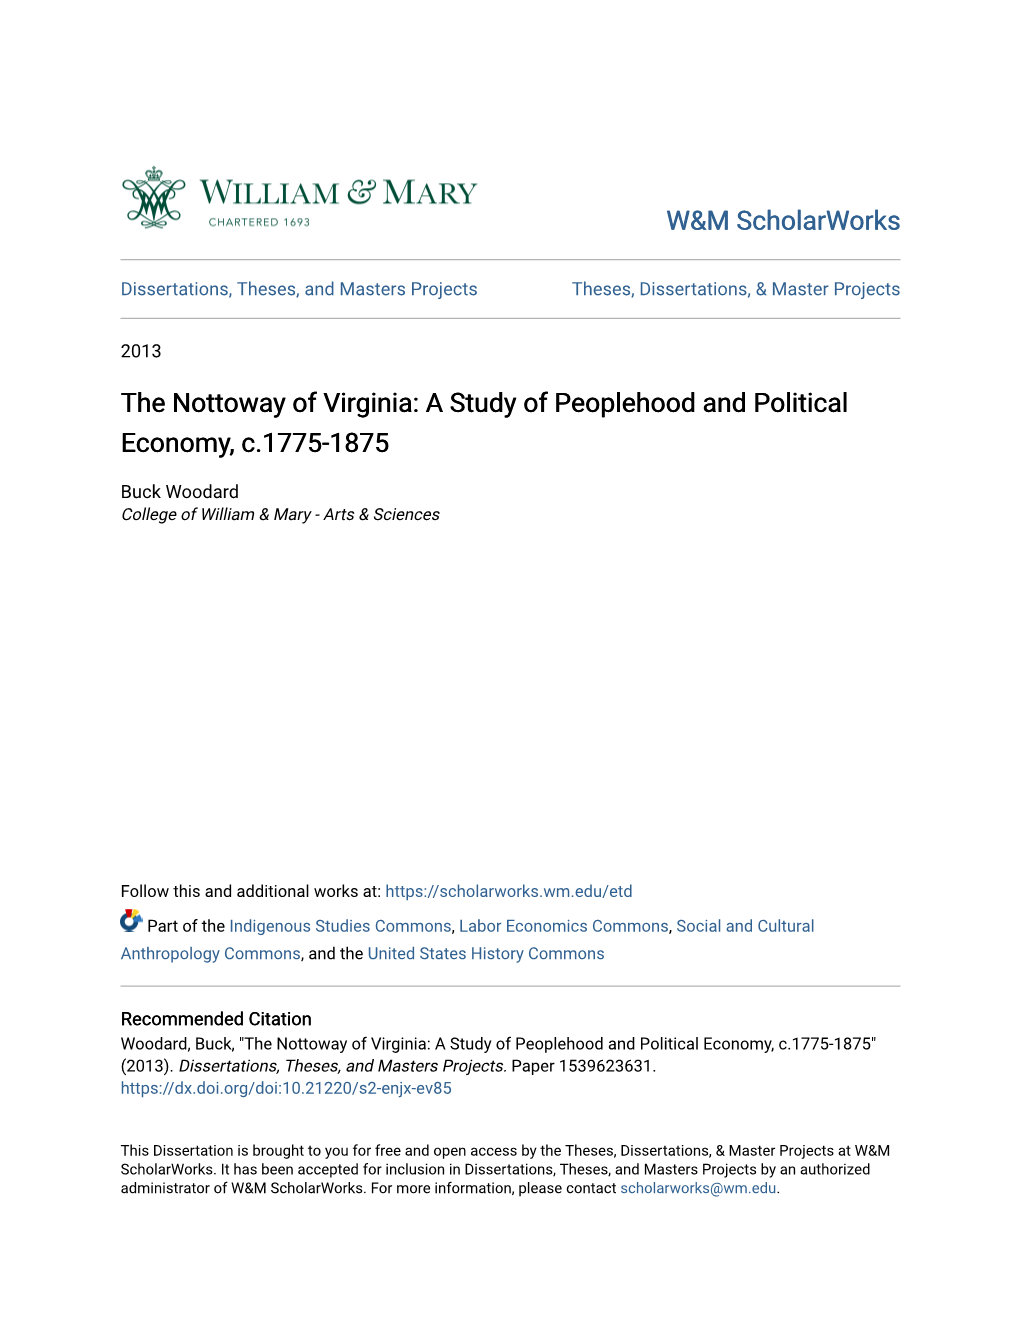 The Nottoway of Virginia: a Study of Peoplehood and Political Economy, C.1775-1875